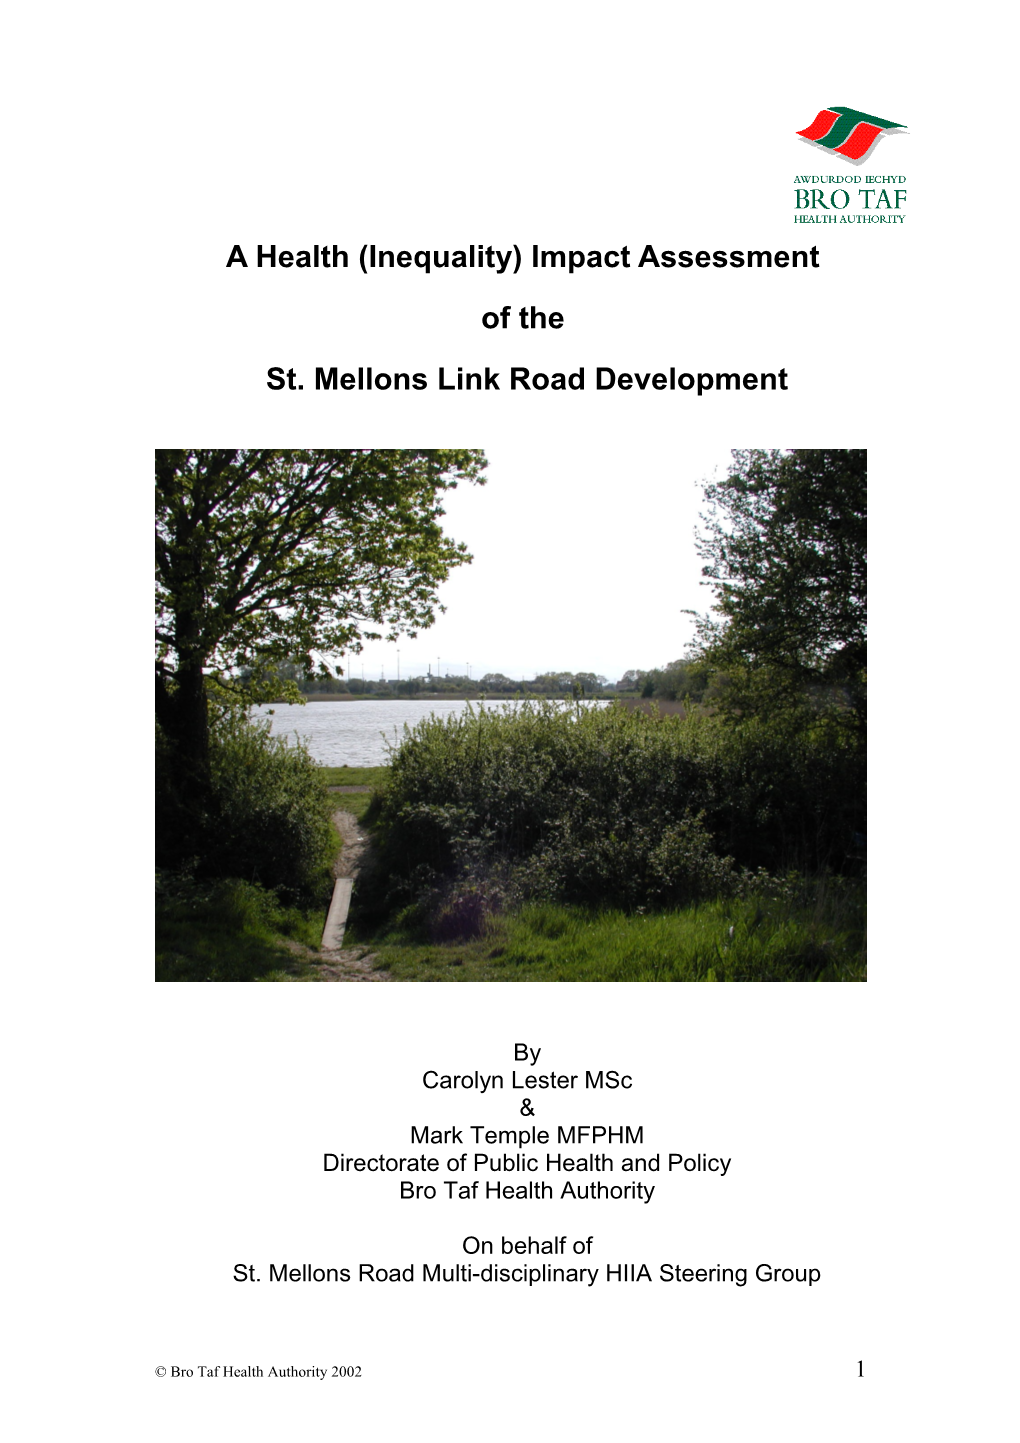 A Health (Inequality) Impact Assessment